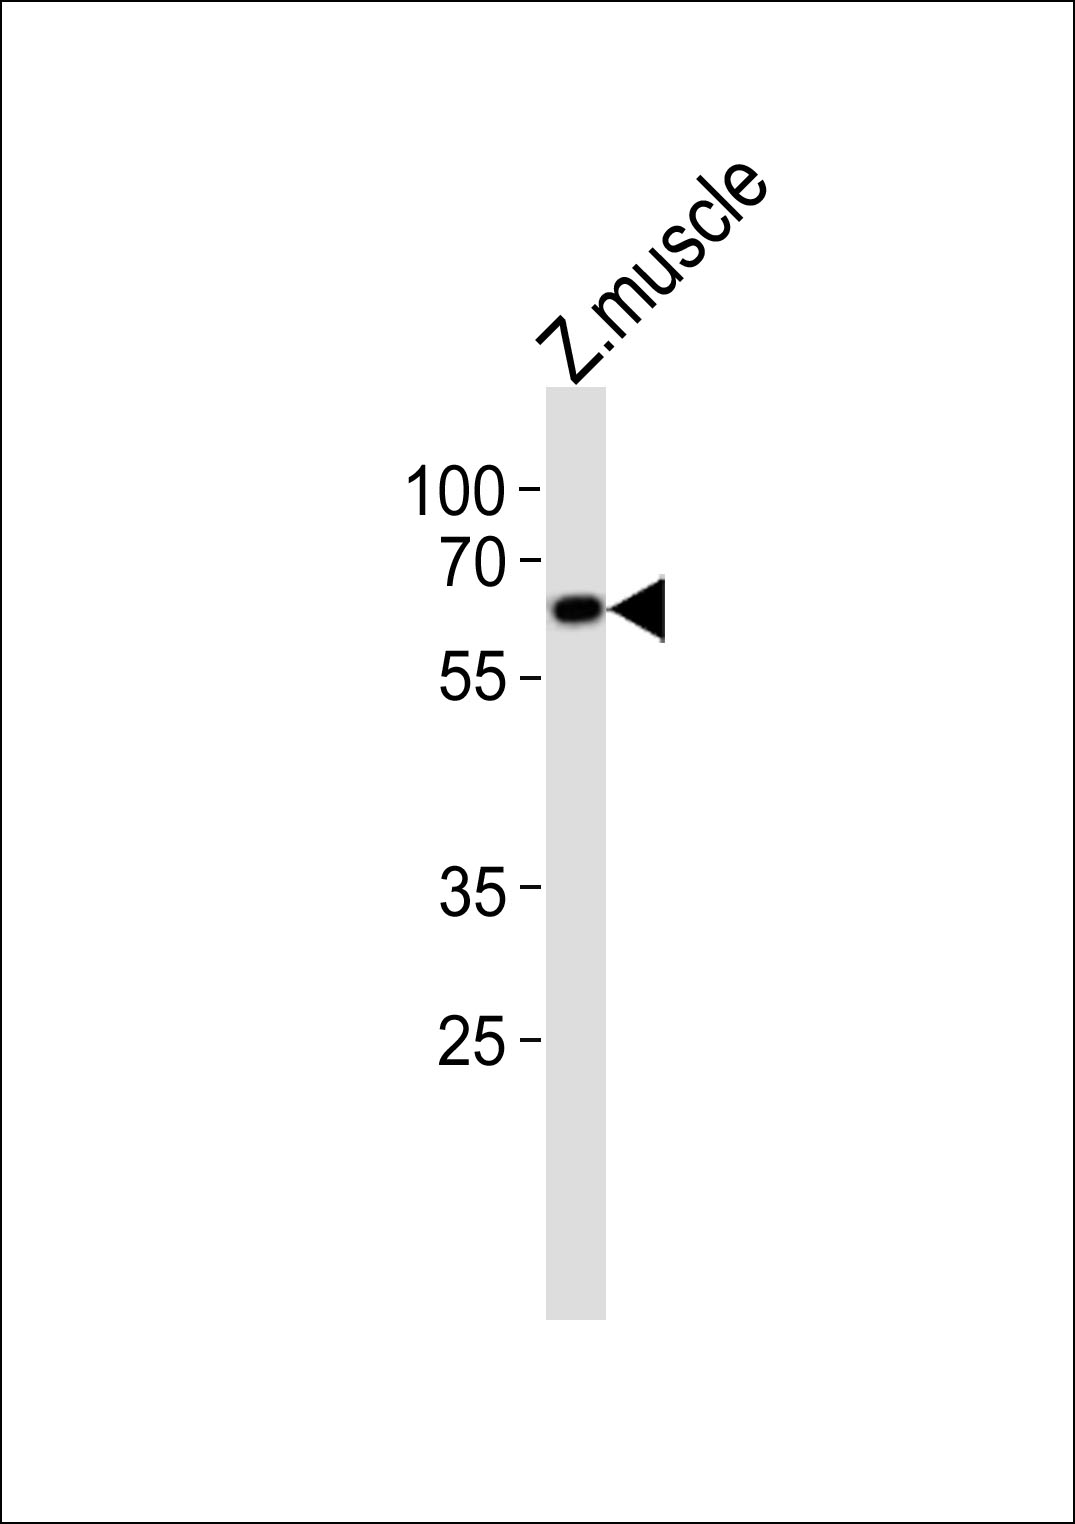 Western blot analysis of lysate from zebra fish muscle tissue lysate,  using (DANRE) edc3 Antibody (Center)(Cat.  #Azb18719a).  Azb18719a was diluted at 1:1000.  A goat anti-rabbit IgG H&L(HRP) at 1:10000 dilution was used as the secondary antibody. Lysate at 20ug.